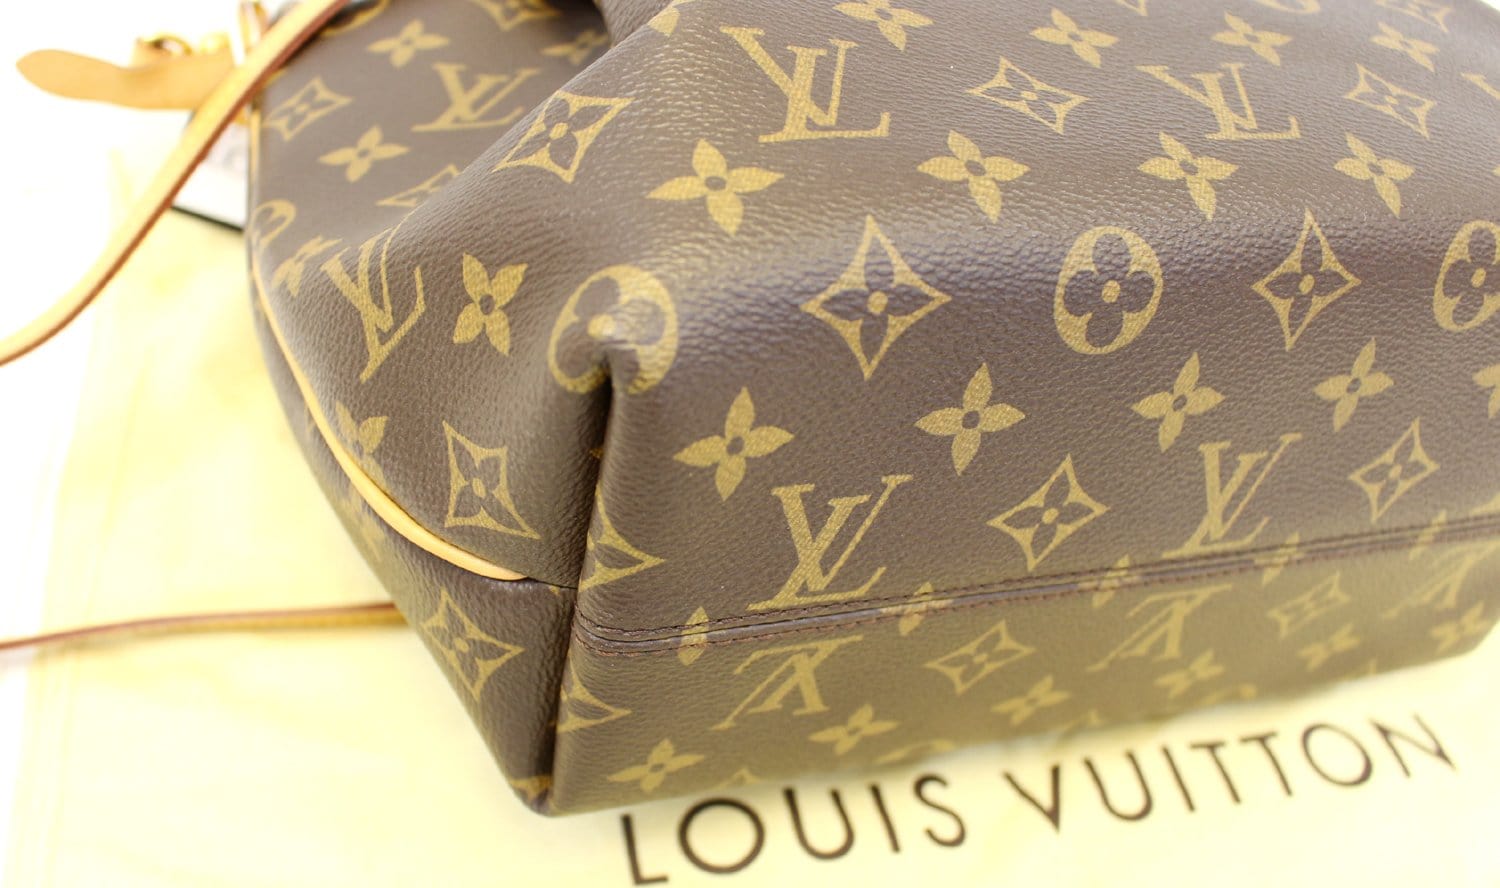 LOUIS VUITTON TURENNE PM FIRST IMPRESSIONS 